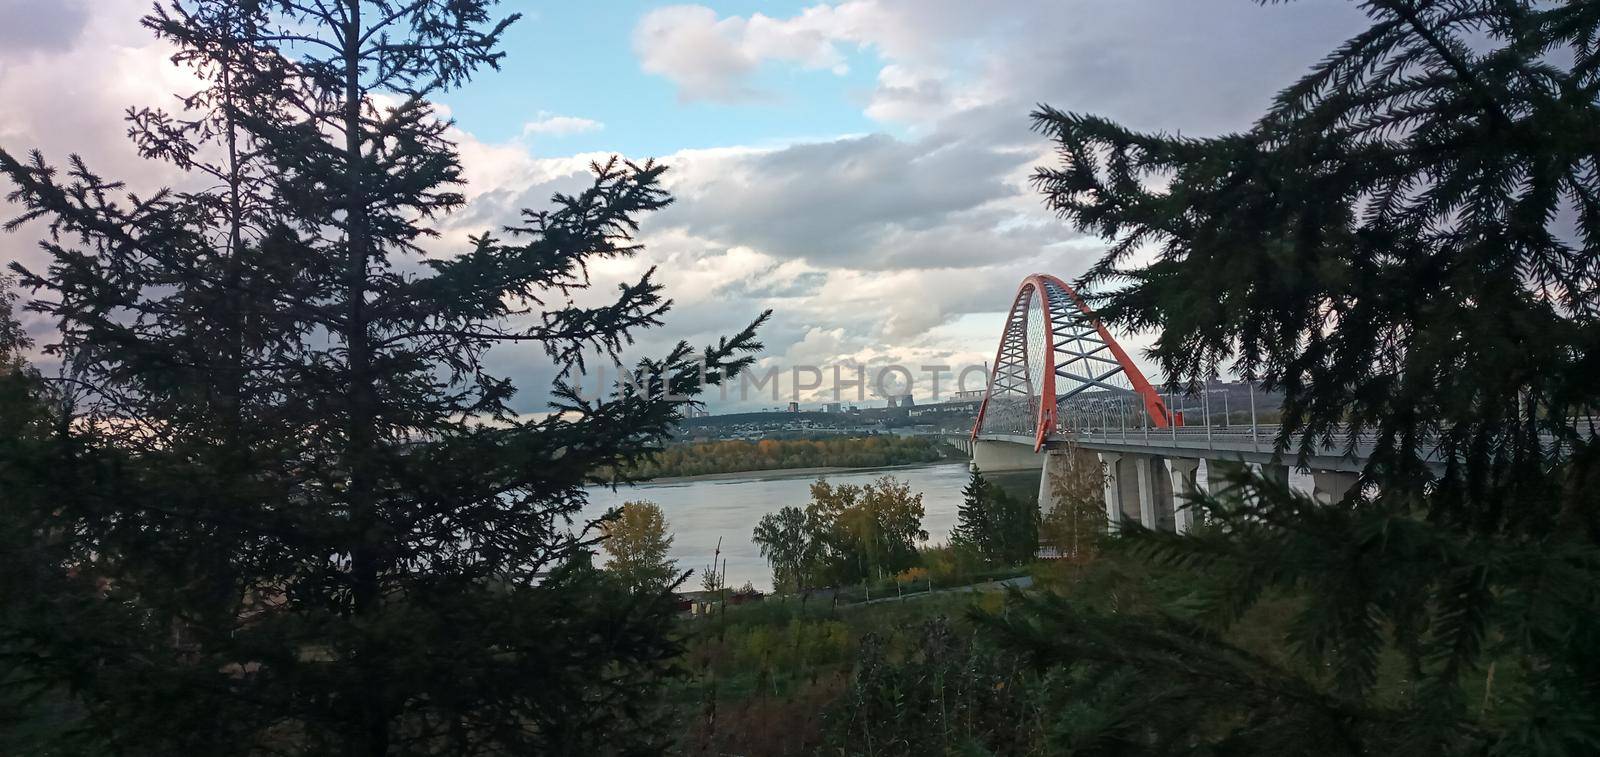 Red arch of the cable-stayed suspension bridge over the wide Ob River. Novosibirsk, Russia. Red suspension bridge over the Ob River. Bugrinsky bridge over the Ob River.